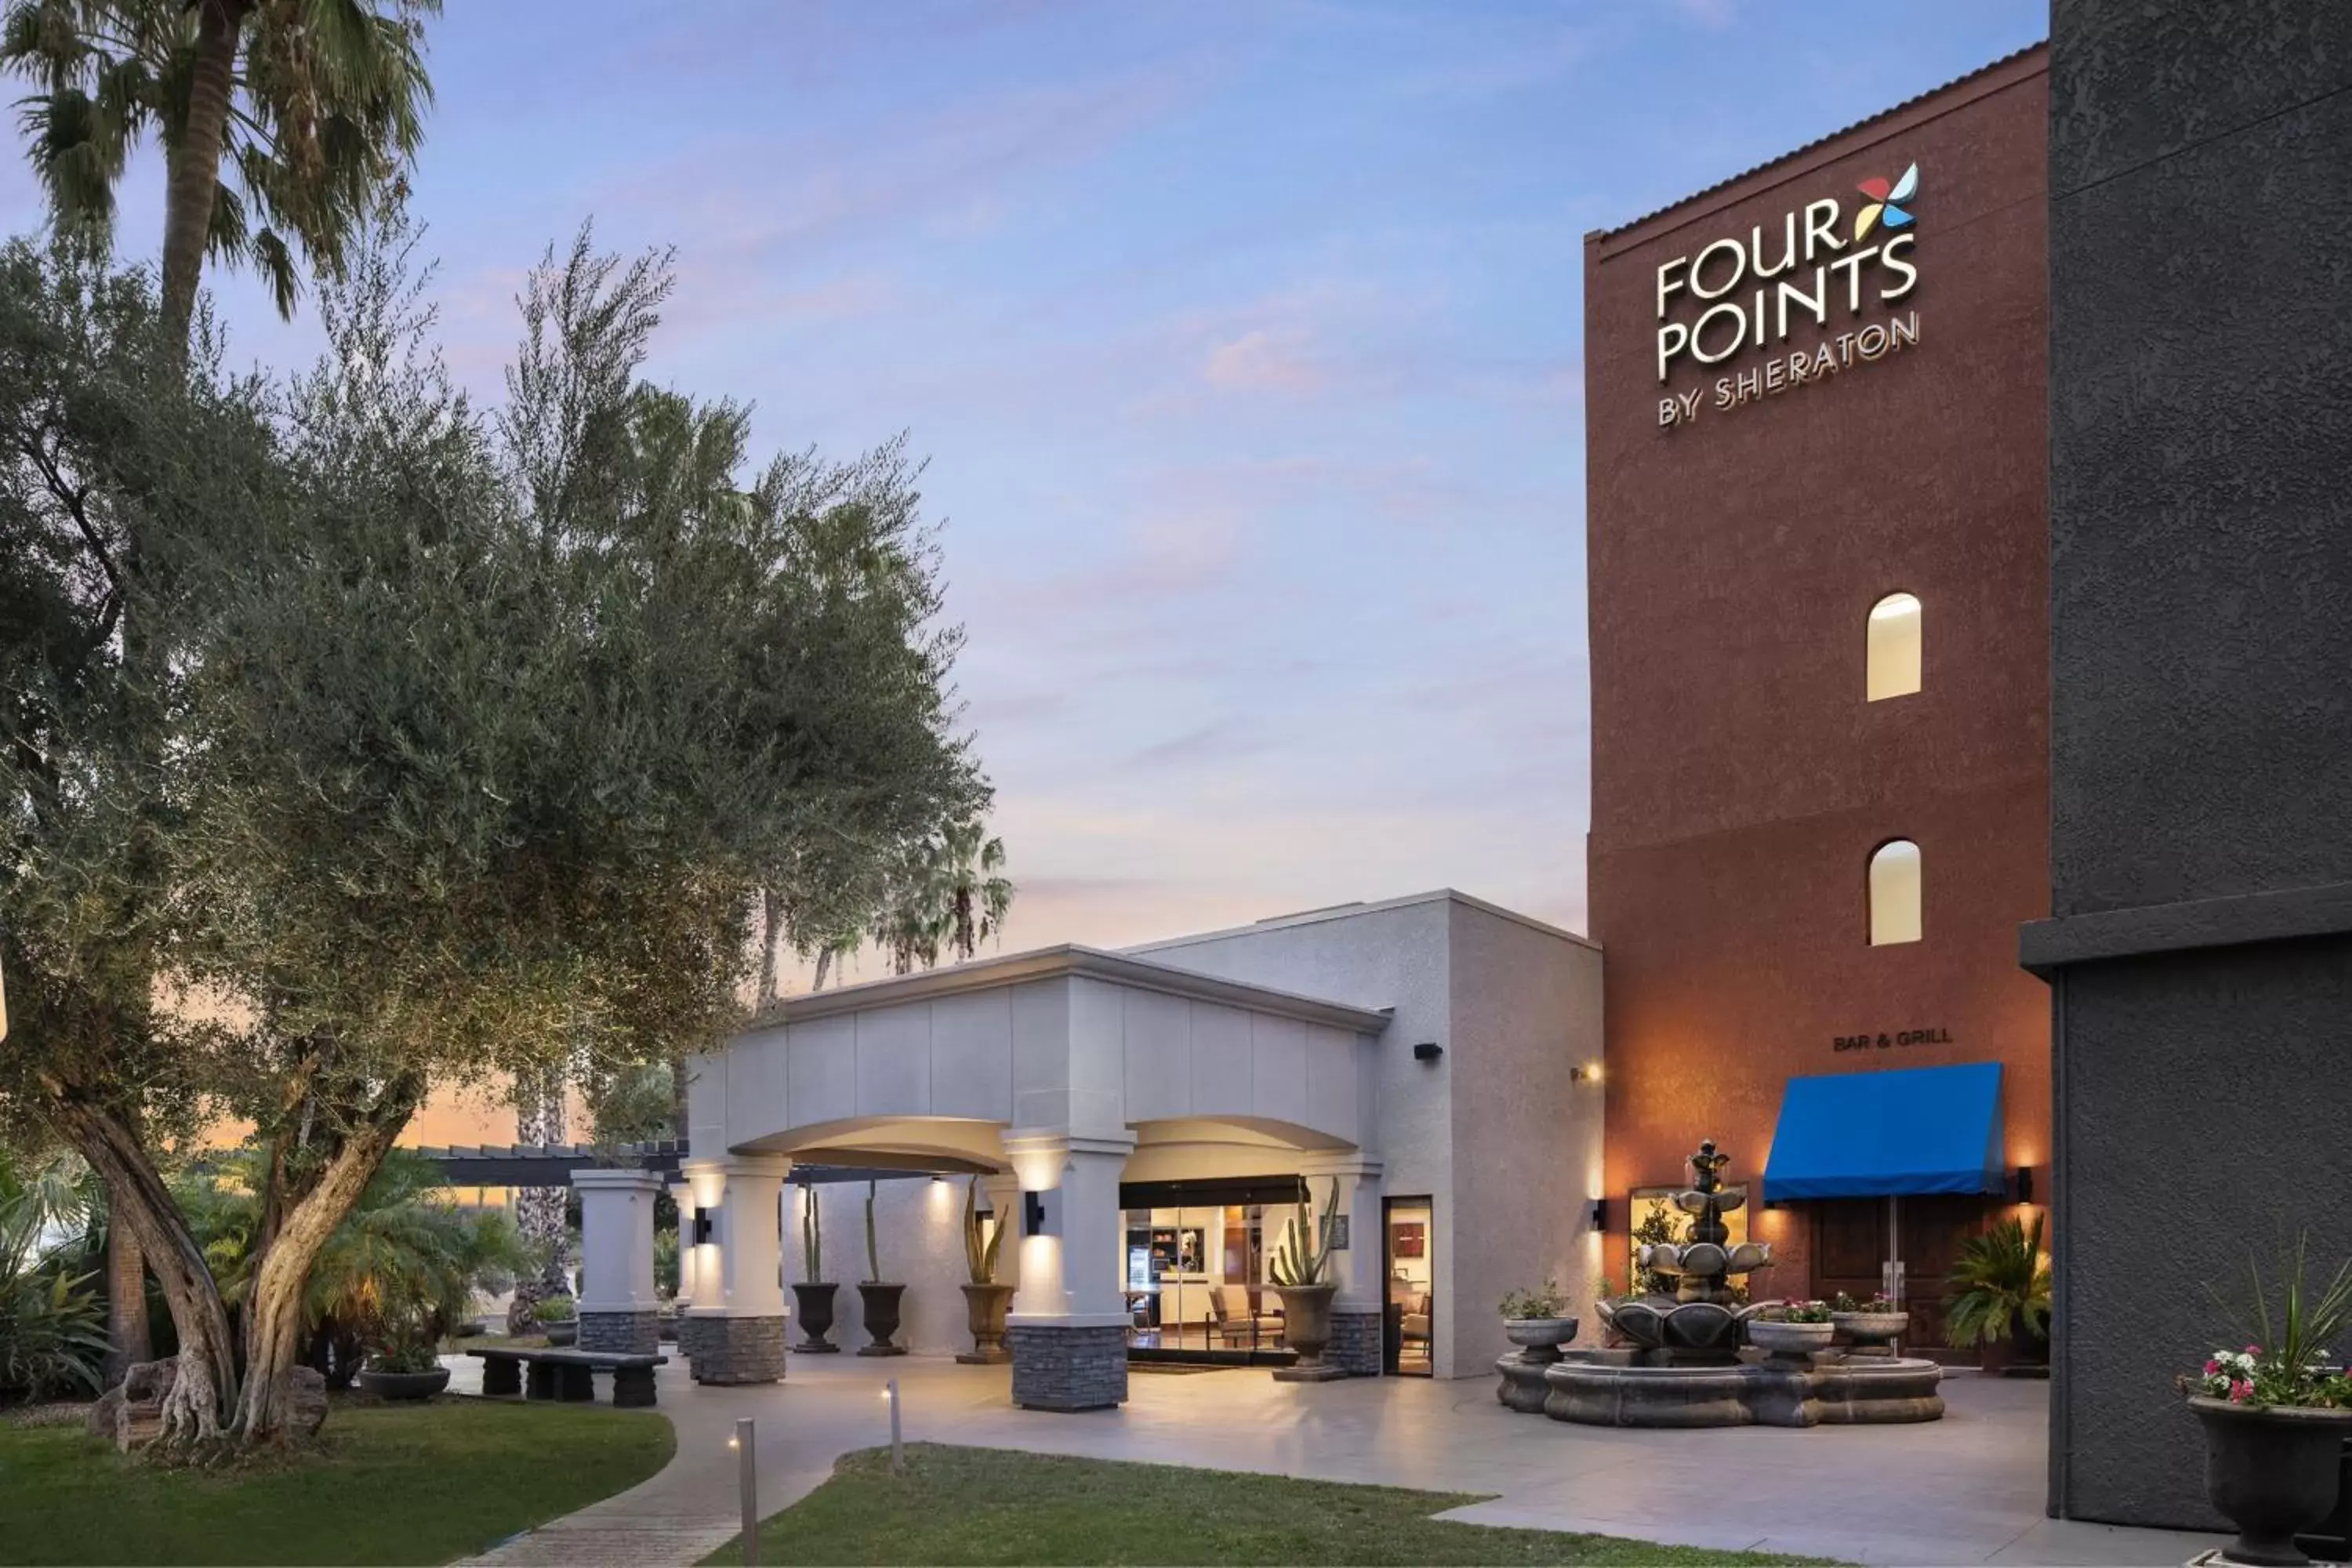 Property Building in Four Points by Sheraton Tucson Airport